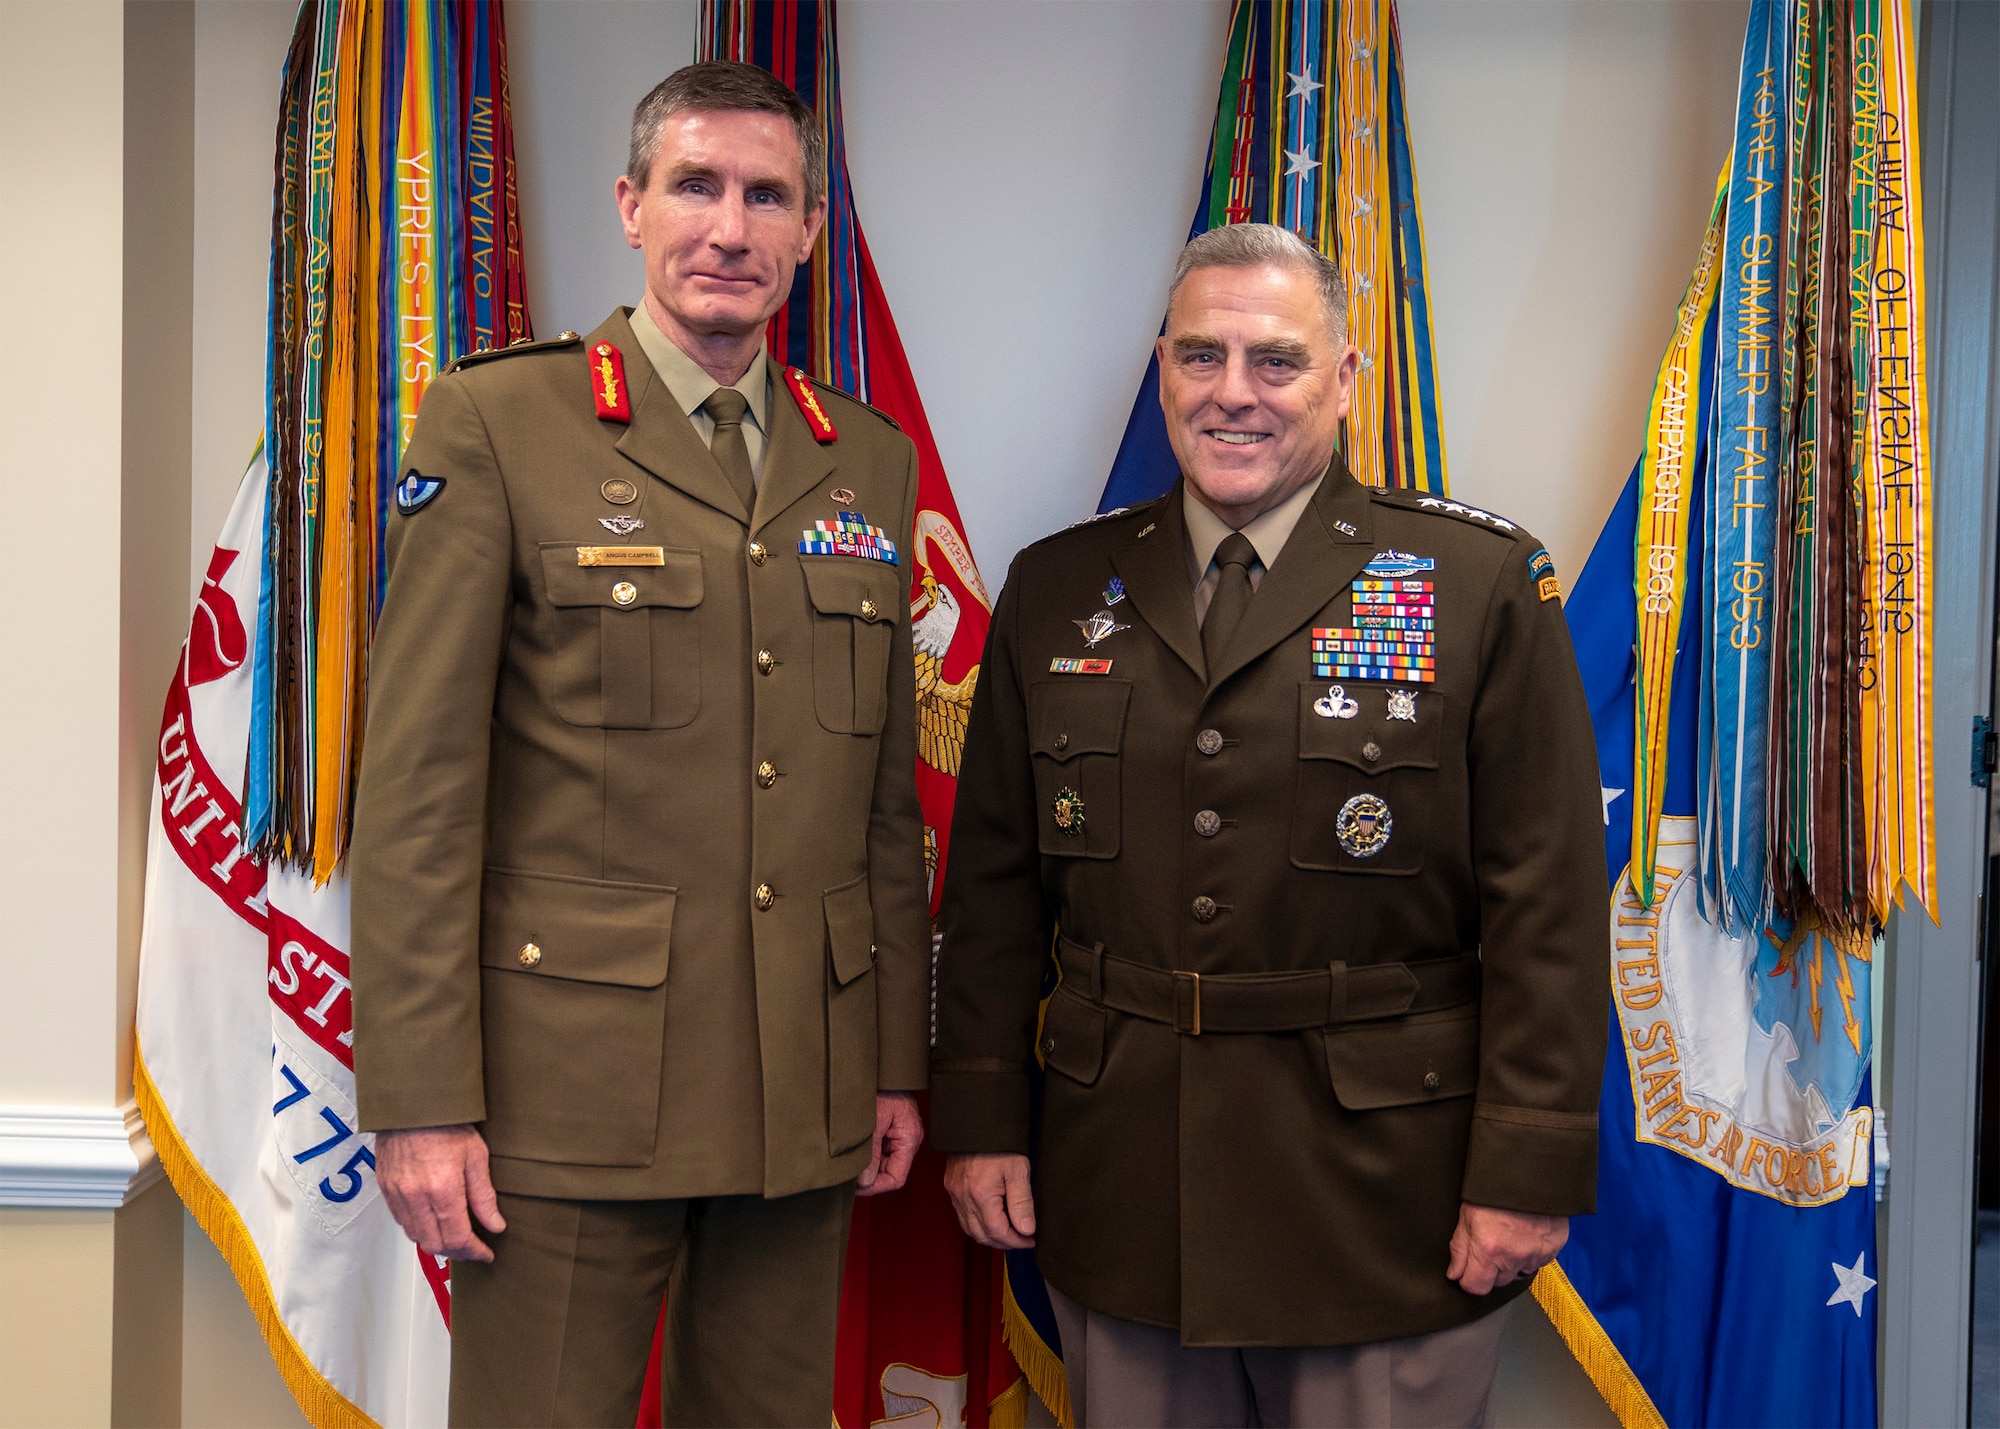 Chairman of the Joint Chiefs of Staff Gen. Mark A. Milley met with Chief of the Australian Defence Force Gen. Angus Campbell in the Pentagon, Oct. 2, 2019.